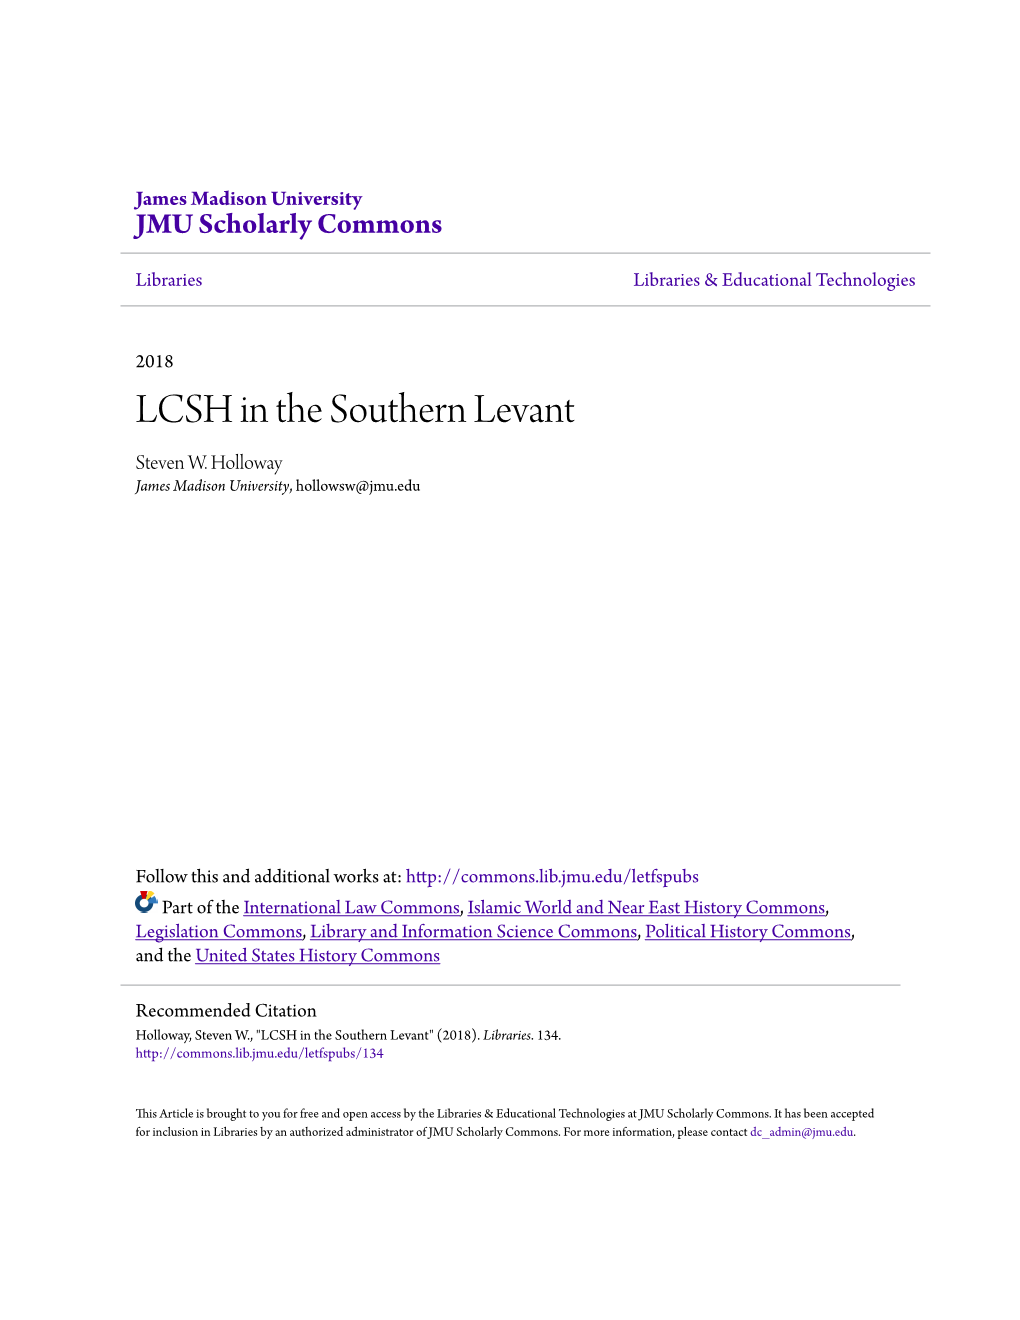 LCSH in the Southern Levant Steven W